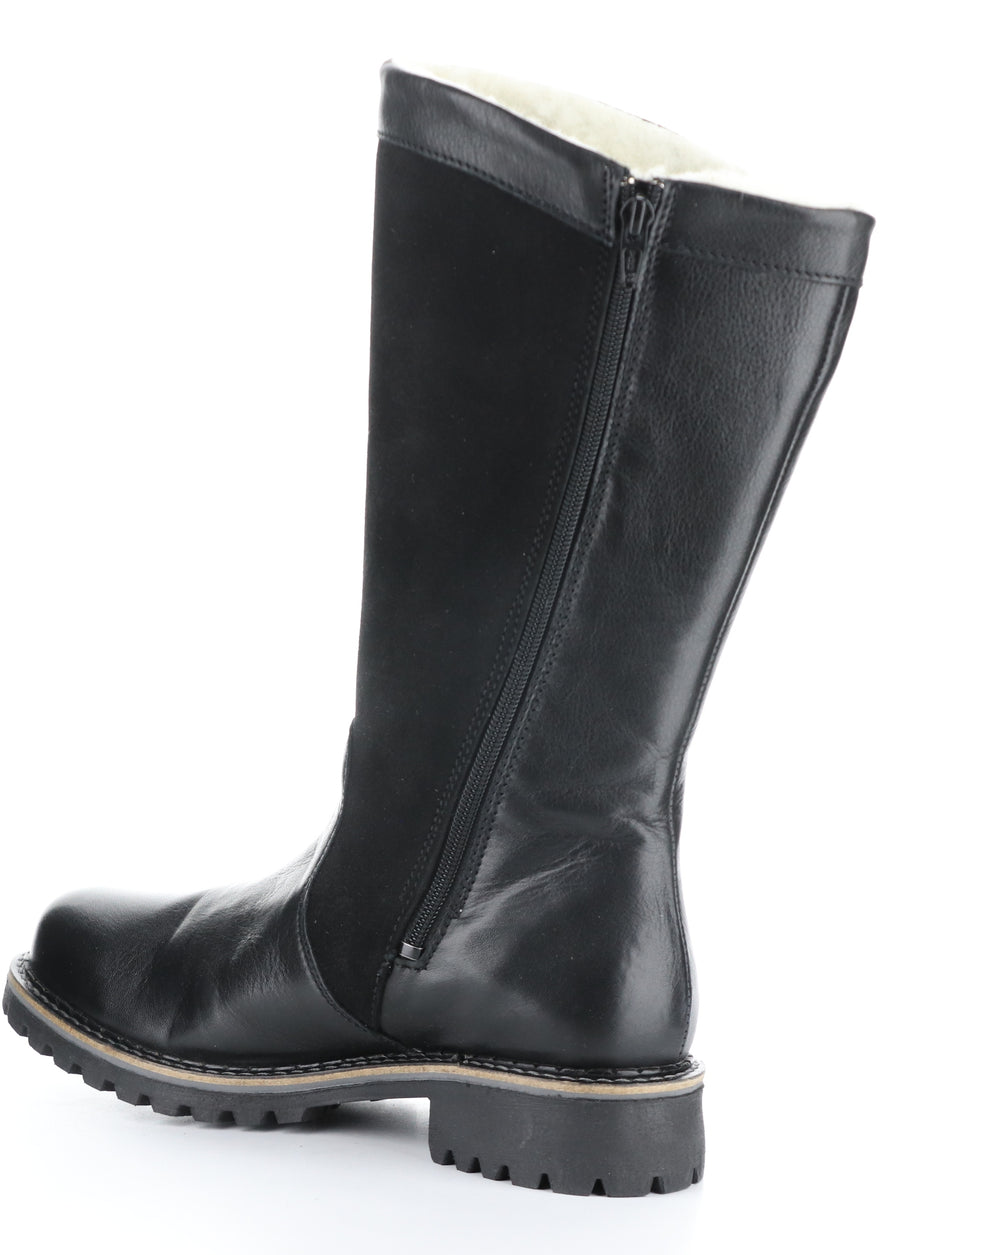 HENRY BLACK Round Toe Boots